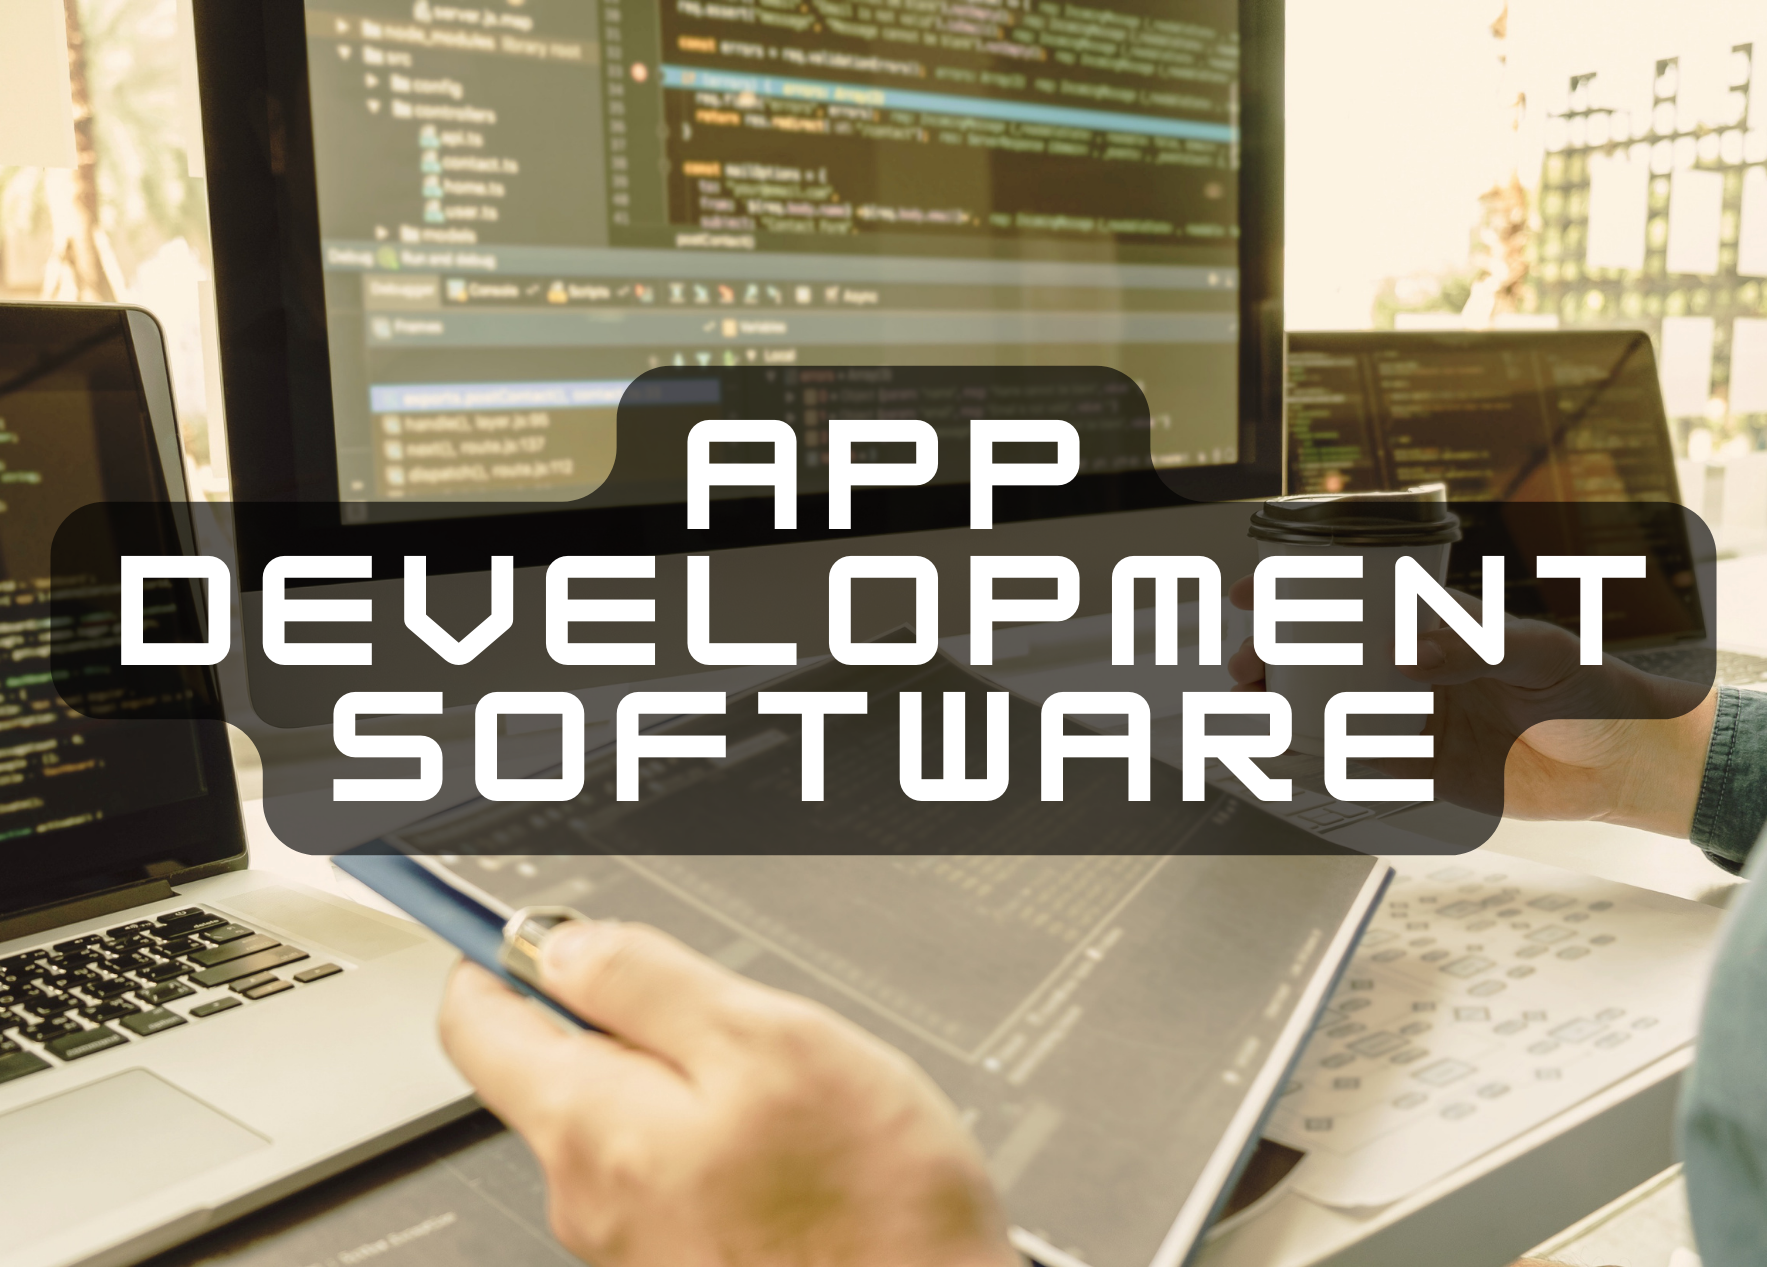 Use App development software to make your app